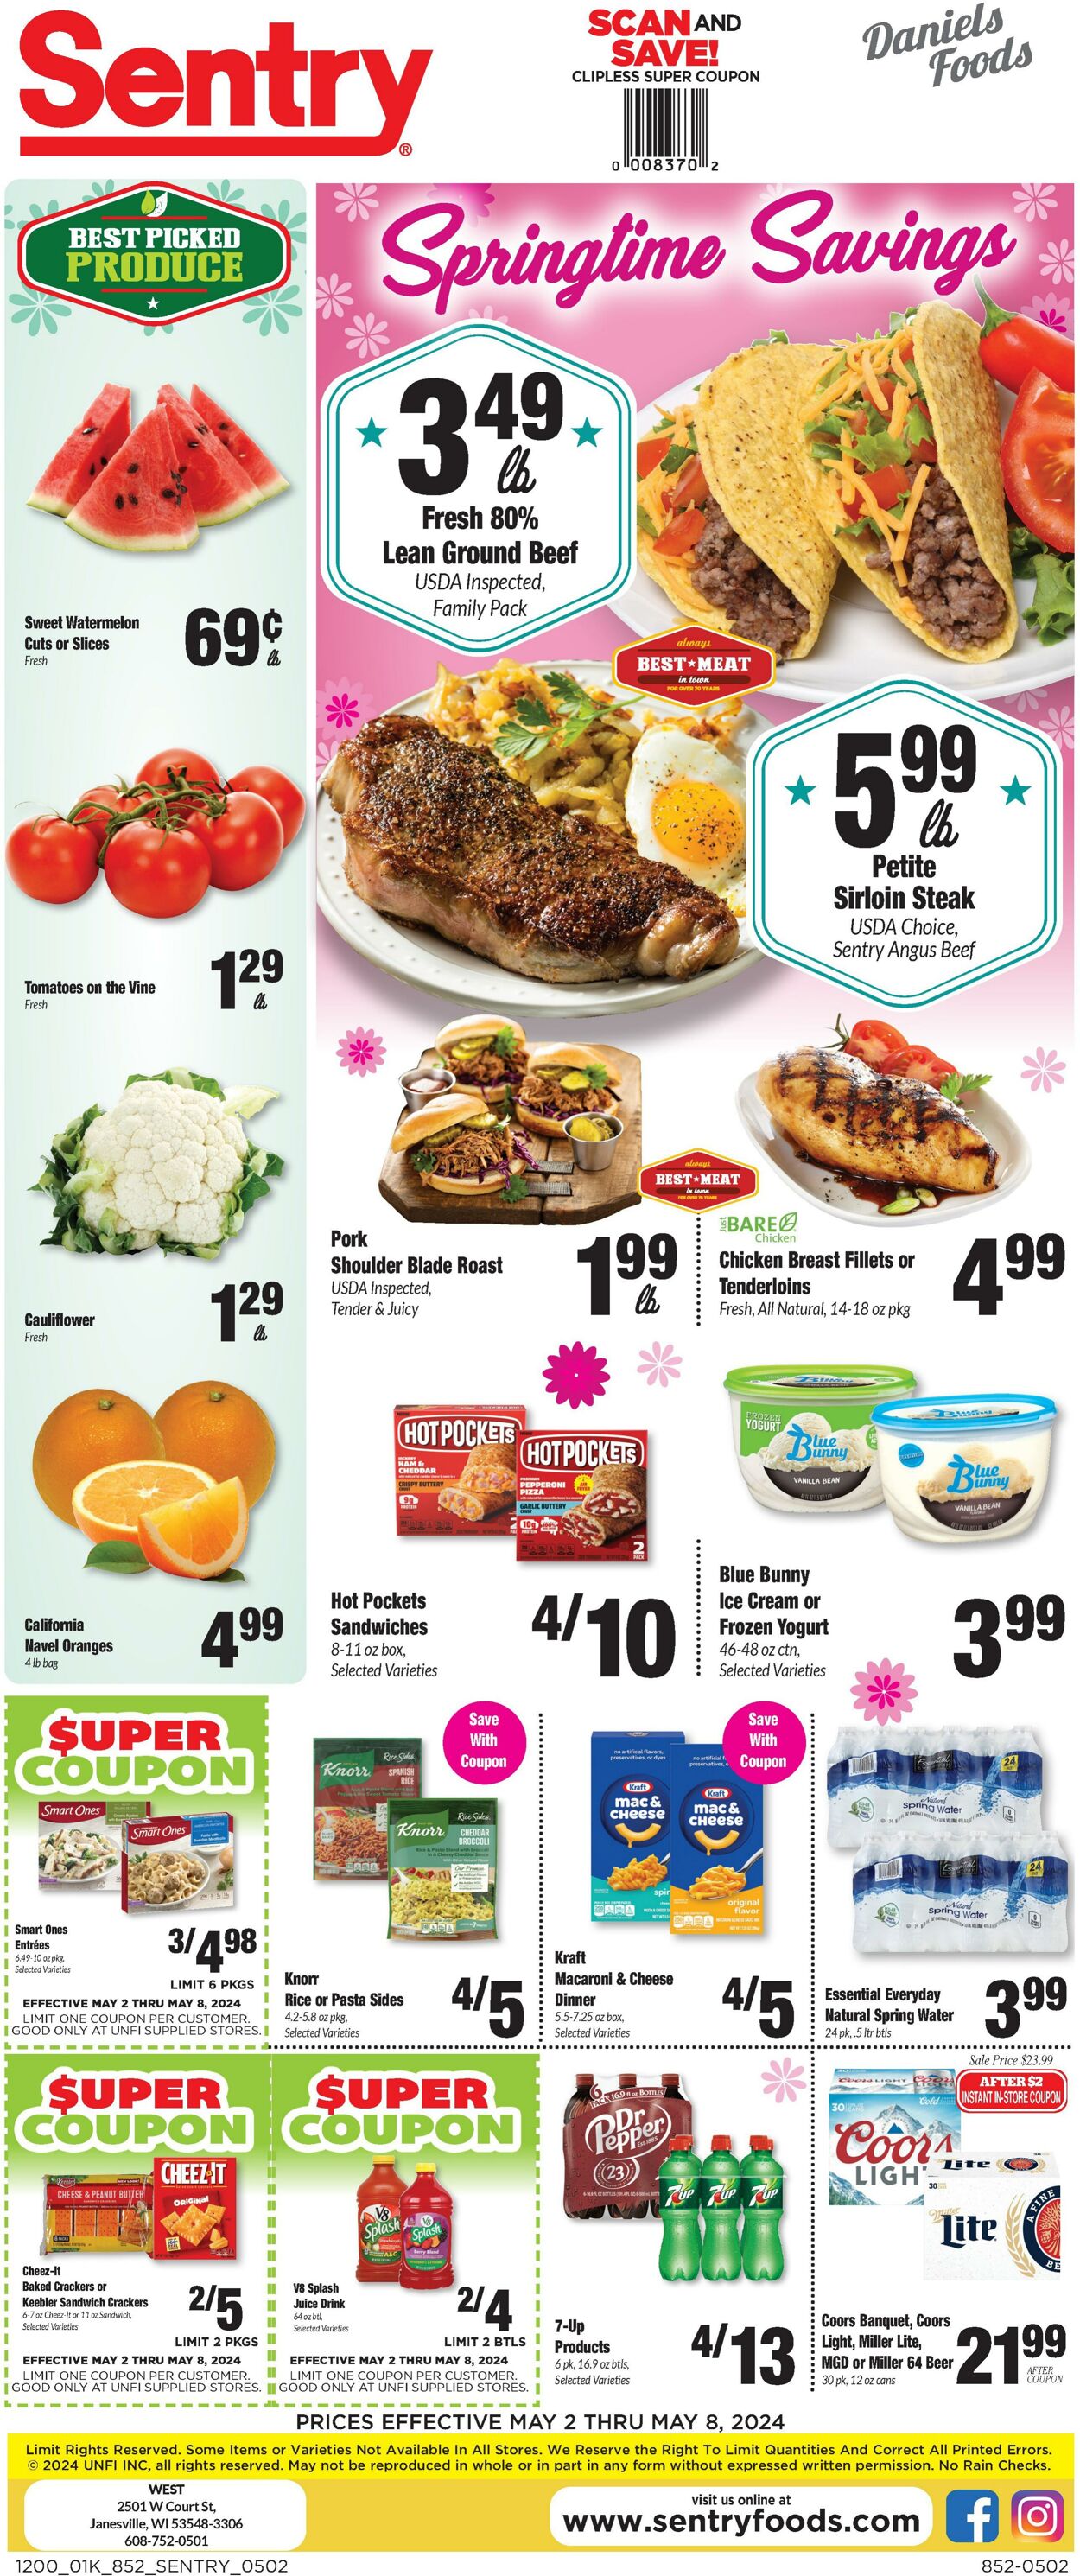 Sentry Promotional weekly ads